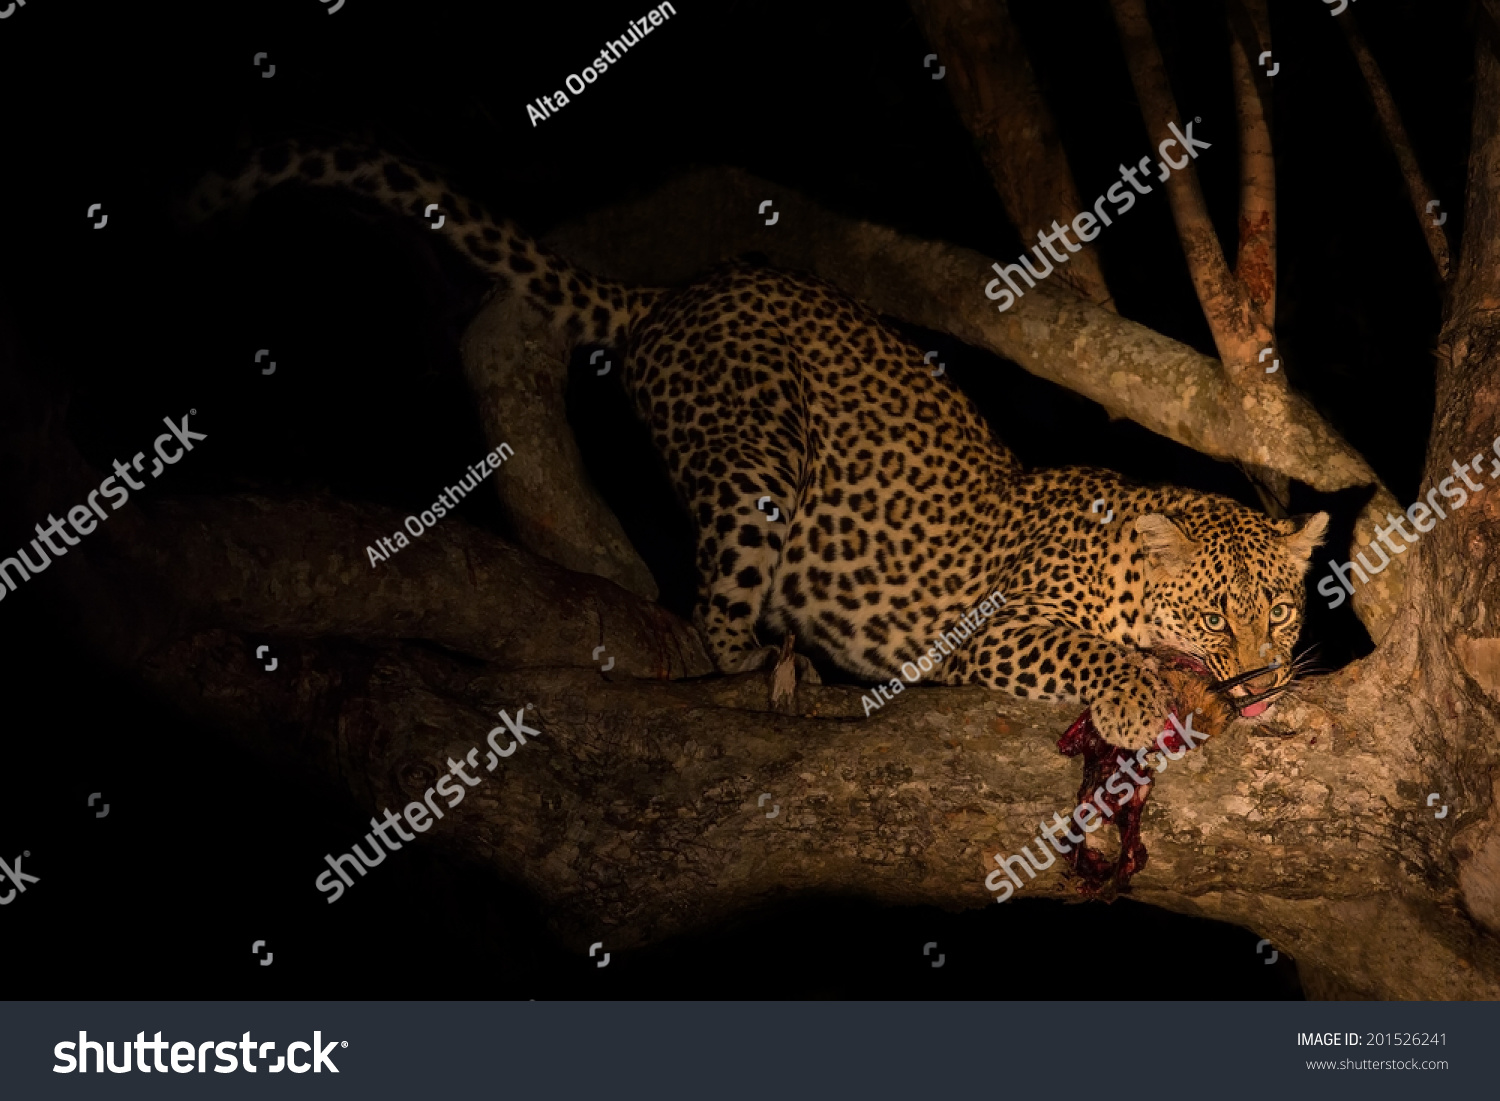 Hungry Leopard Eat A Dead Prey In Tree At Night Stock Photo 201526241 ...